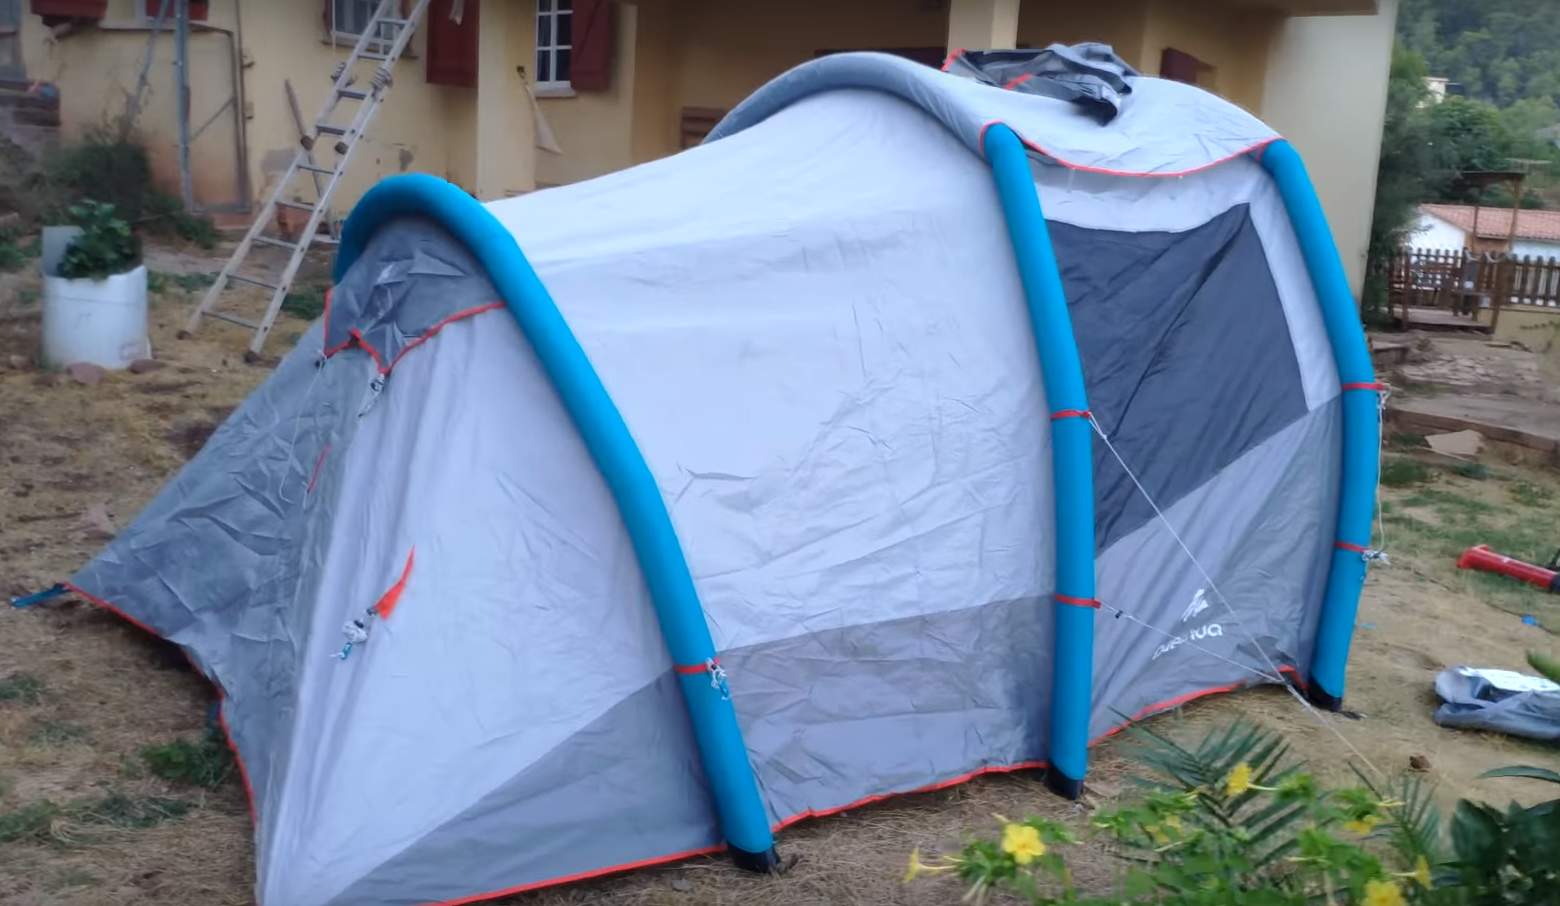 2018-08-30 01_37_34-Setting up camping tent Air seconds 4.1 family XL Quechua Decathlon - YouTube.png